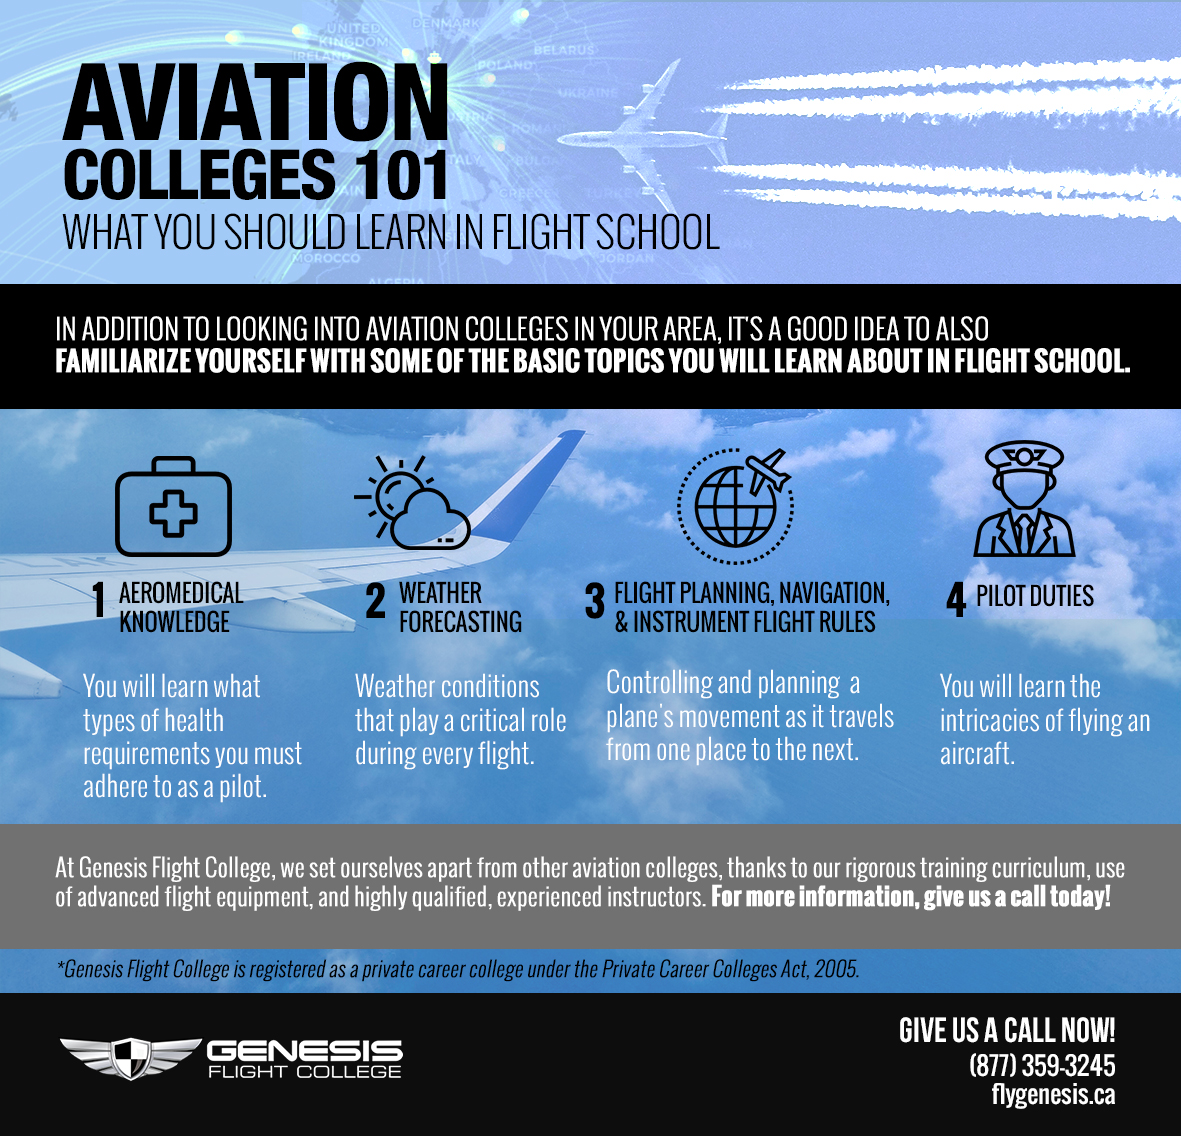 Aviation Colleges 101: What You Should Learn in Flight School